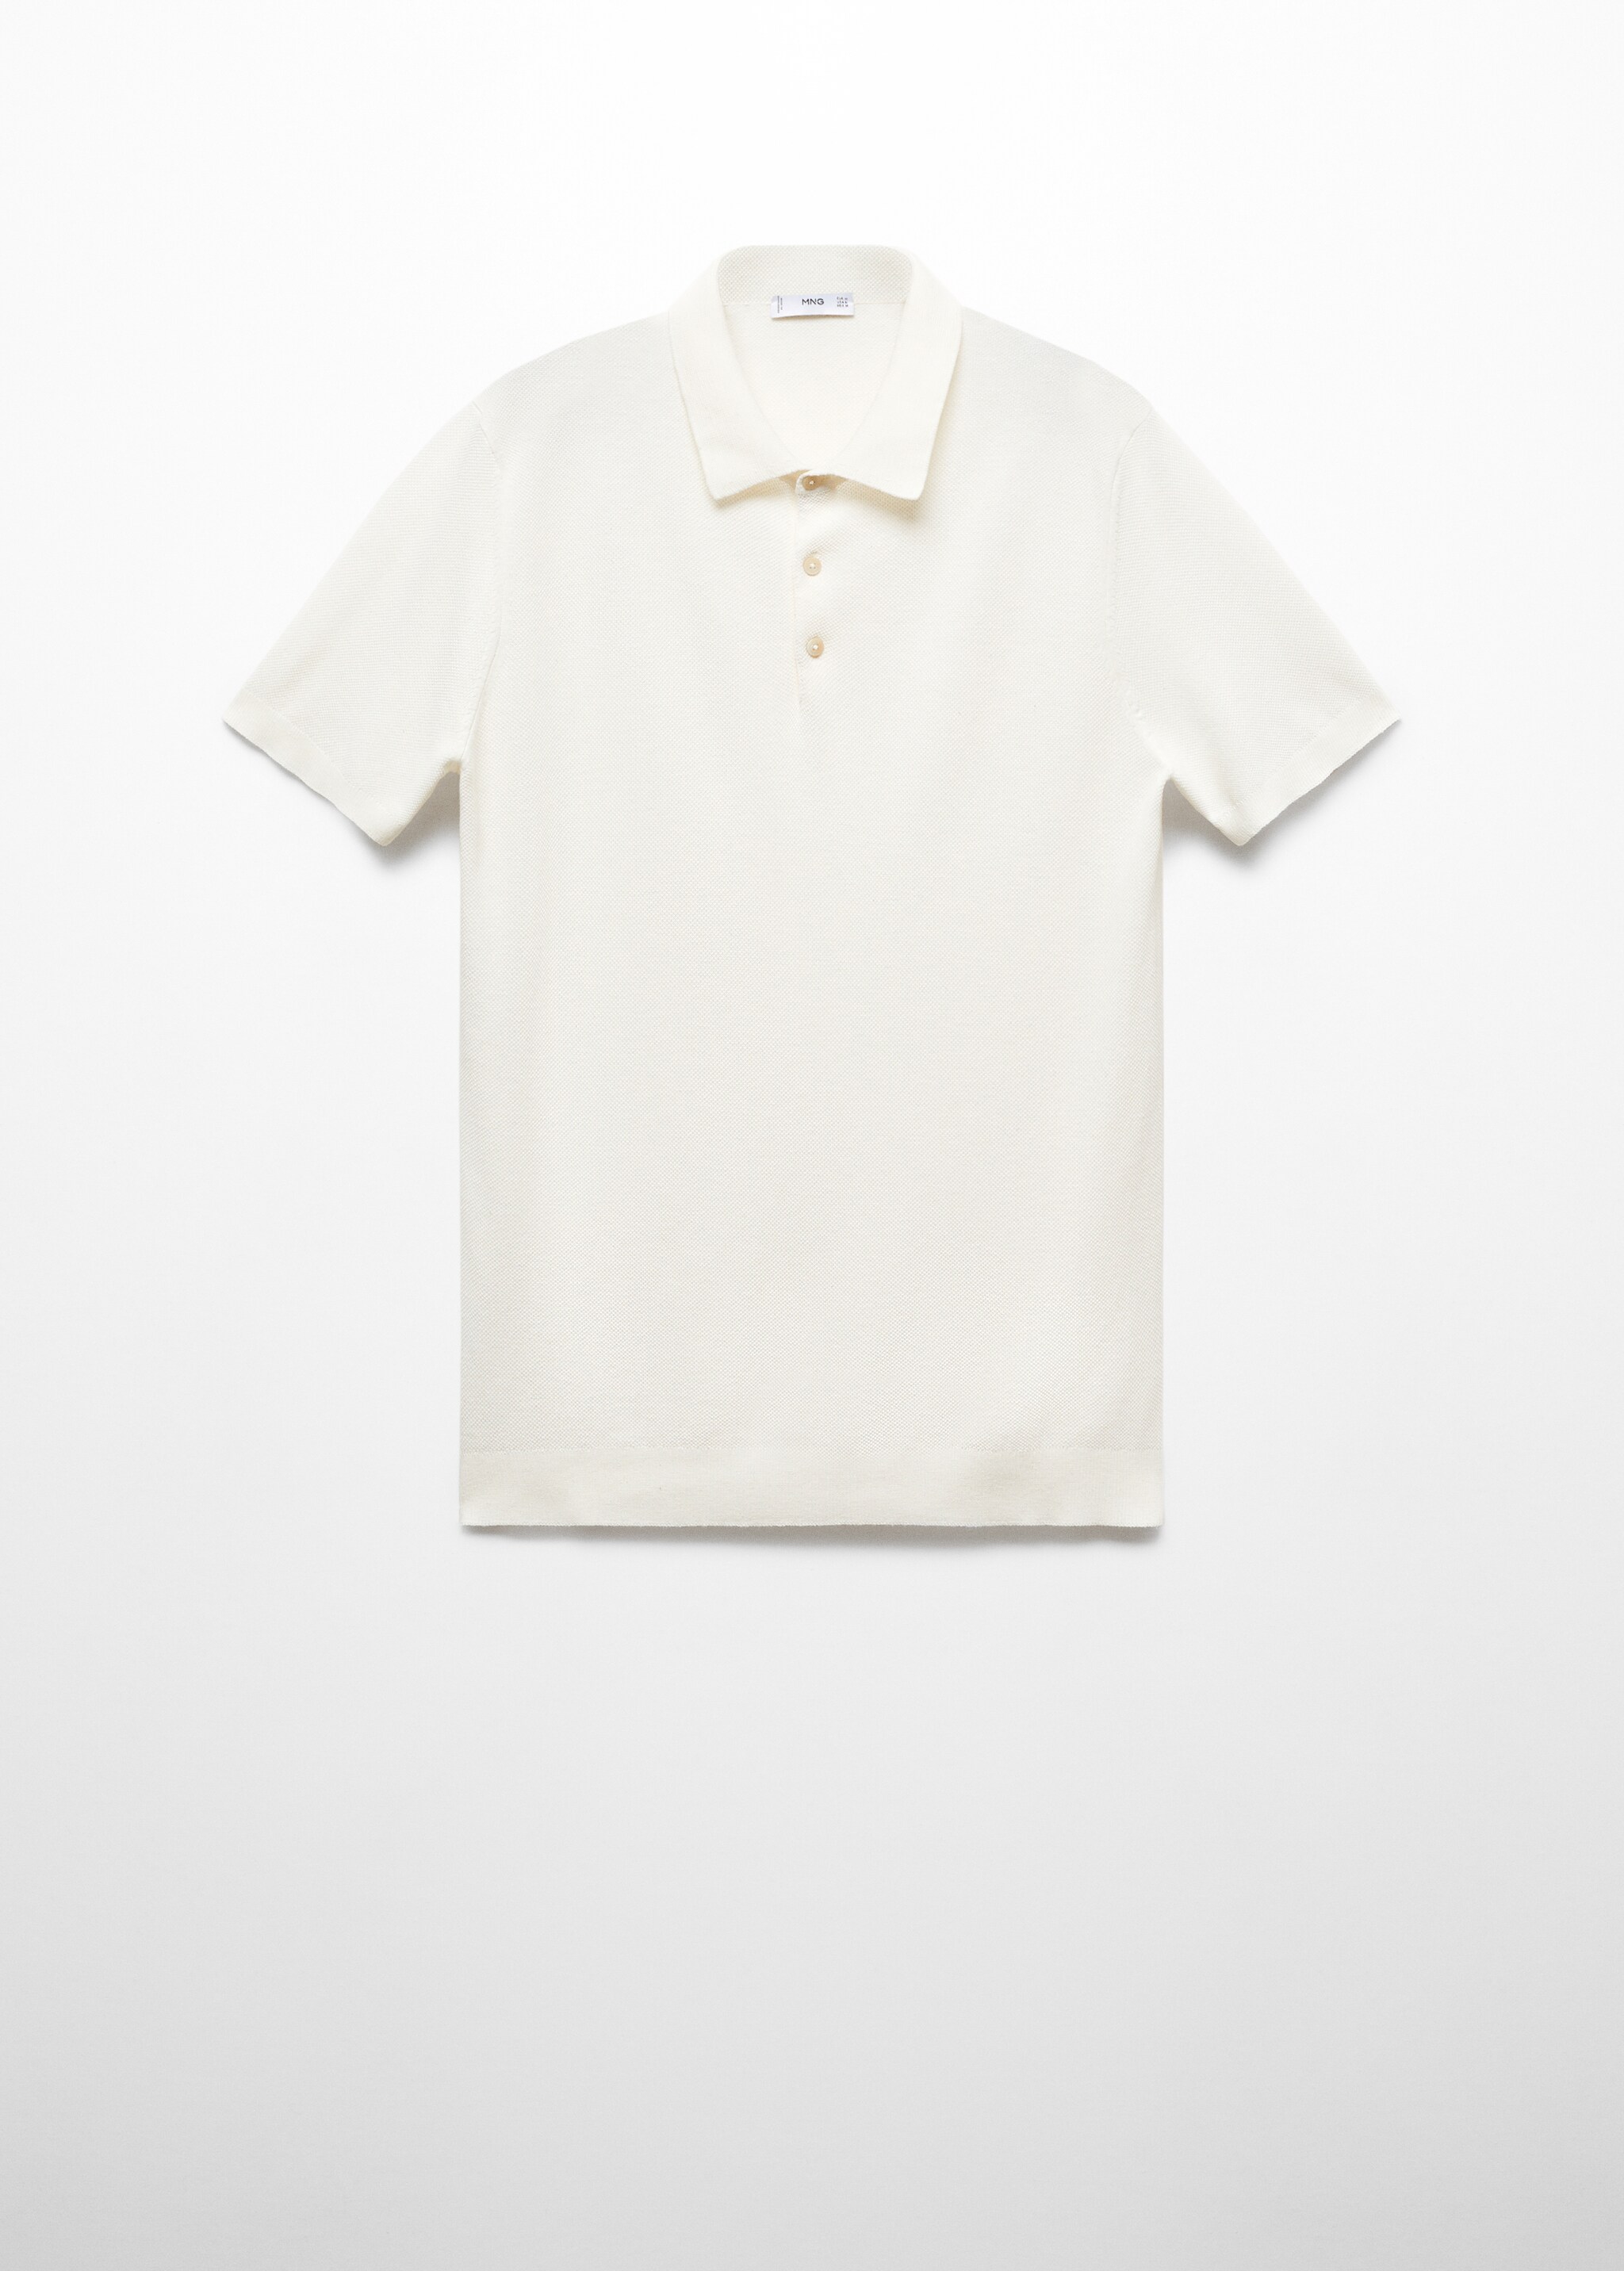 Structured knit cotton polo - Article without model